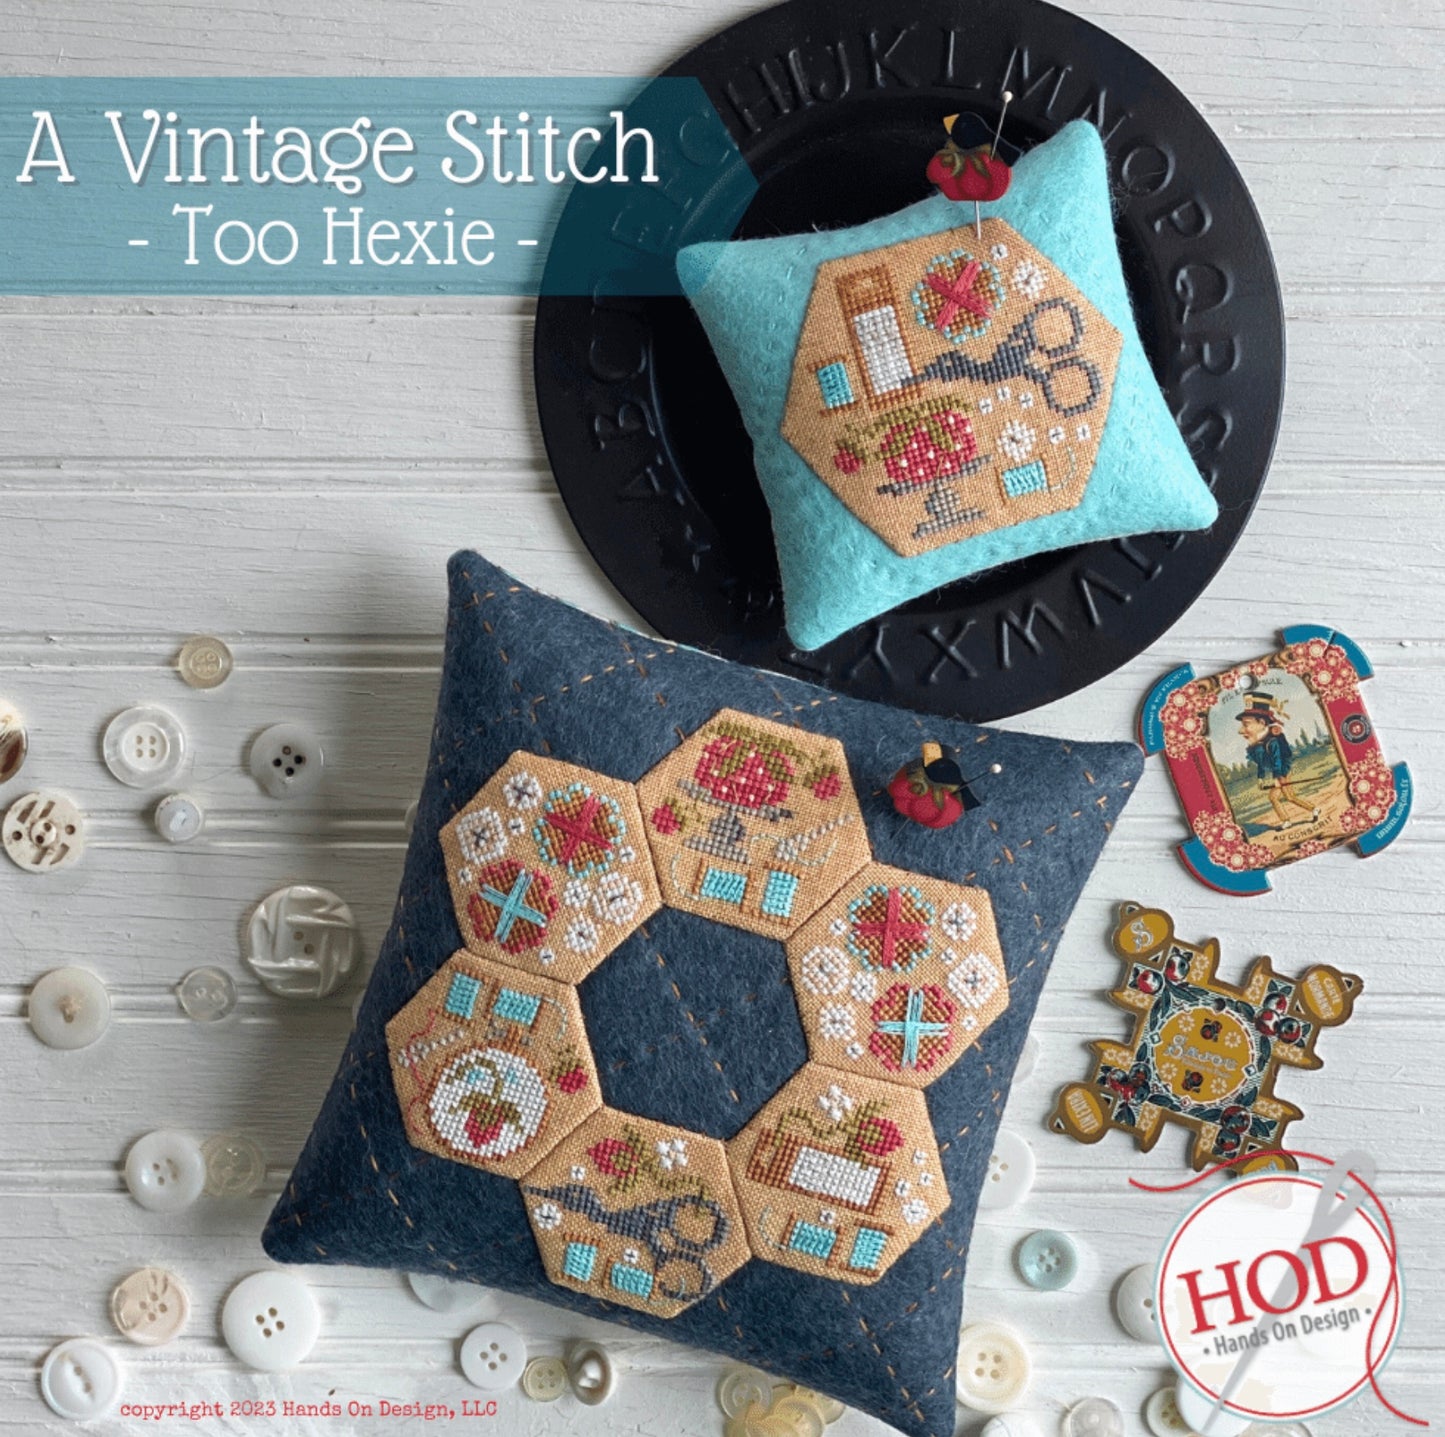 A Vintage Stitch - Too Hexie